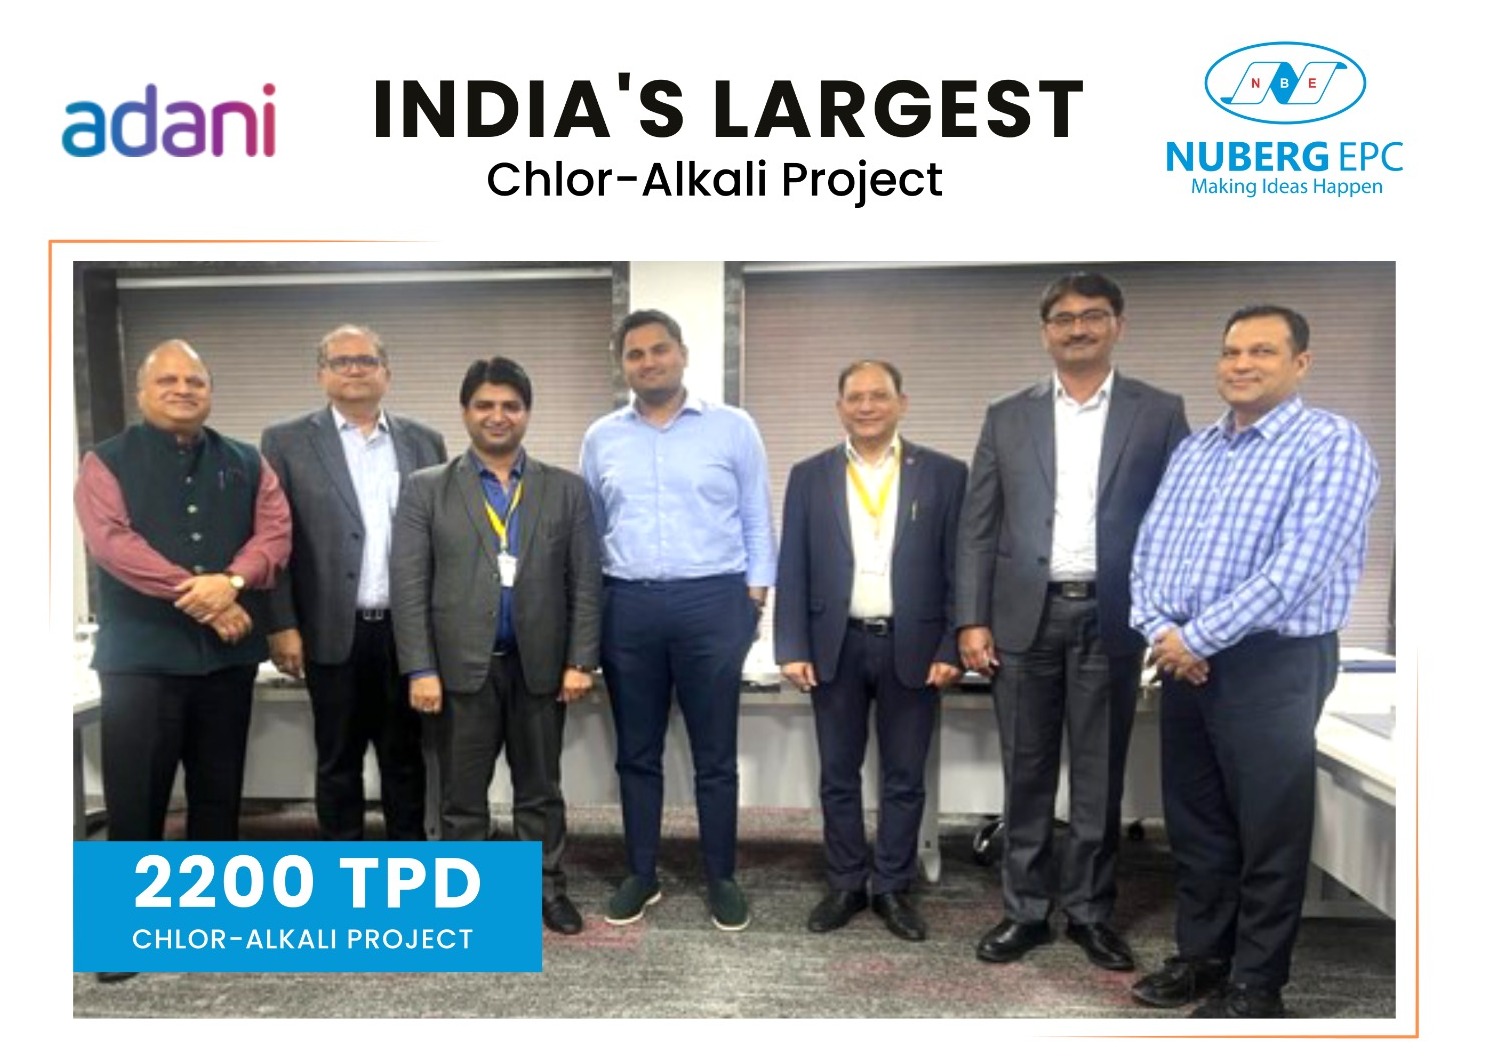 Nuberg EPC spearheads India’s largest Chlor-Alkali project for Adani Group  